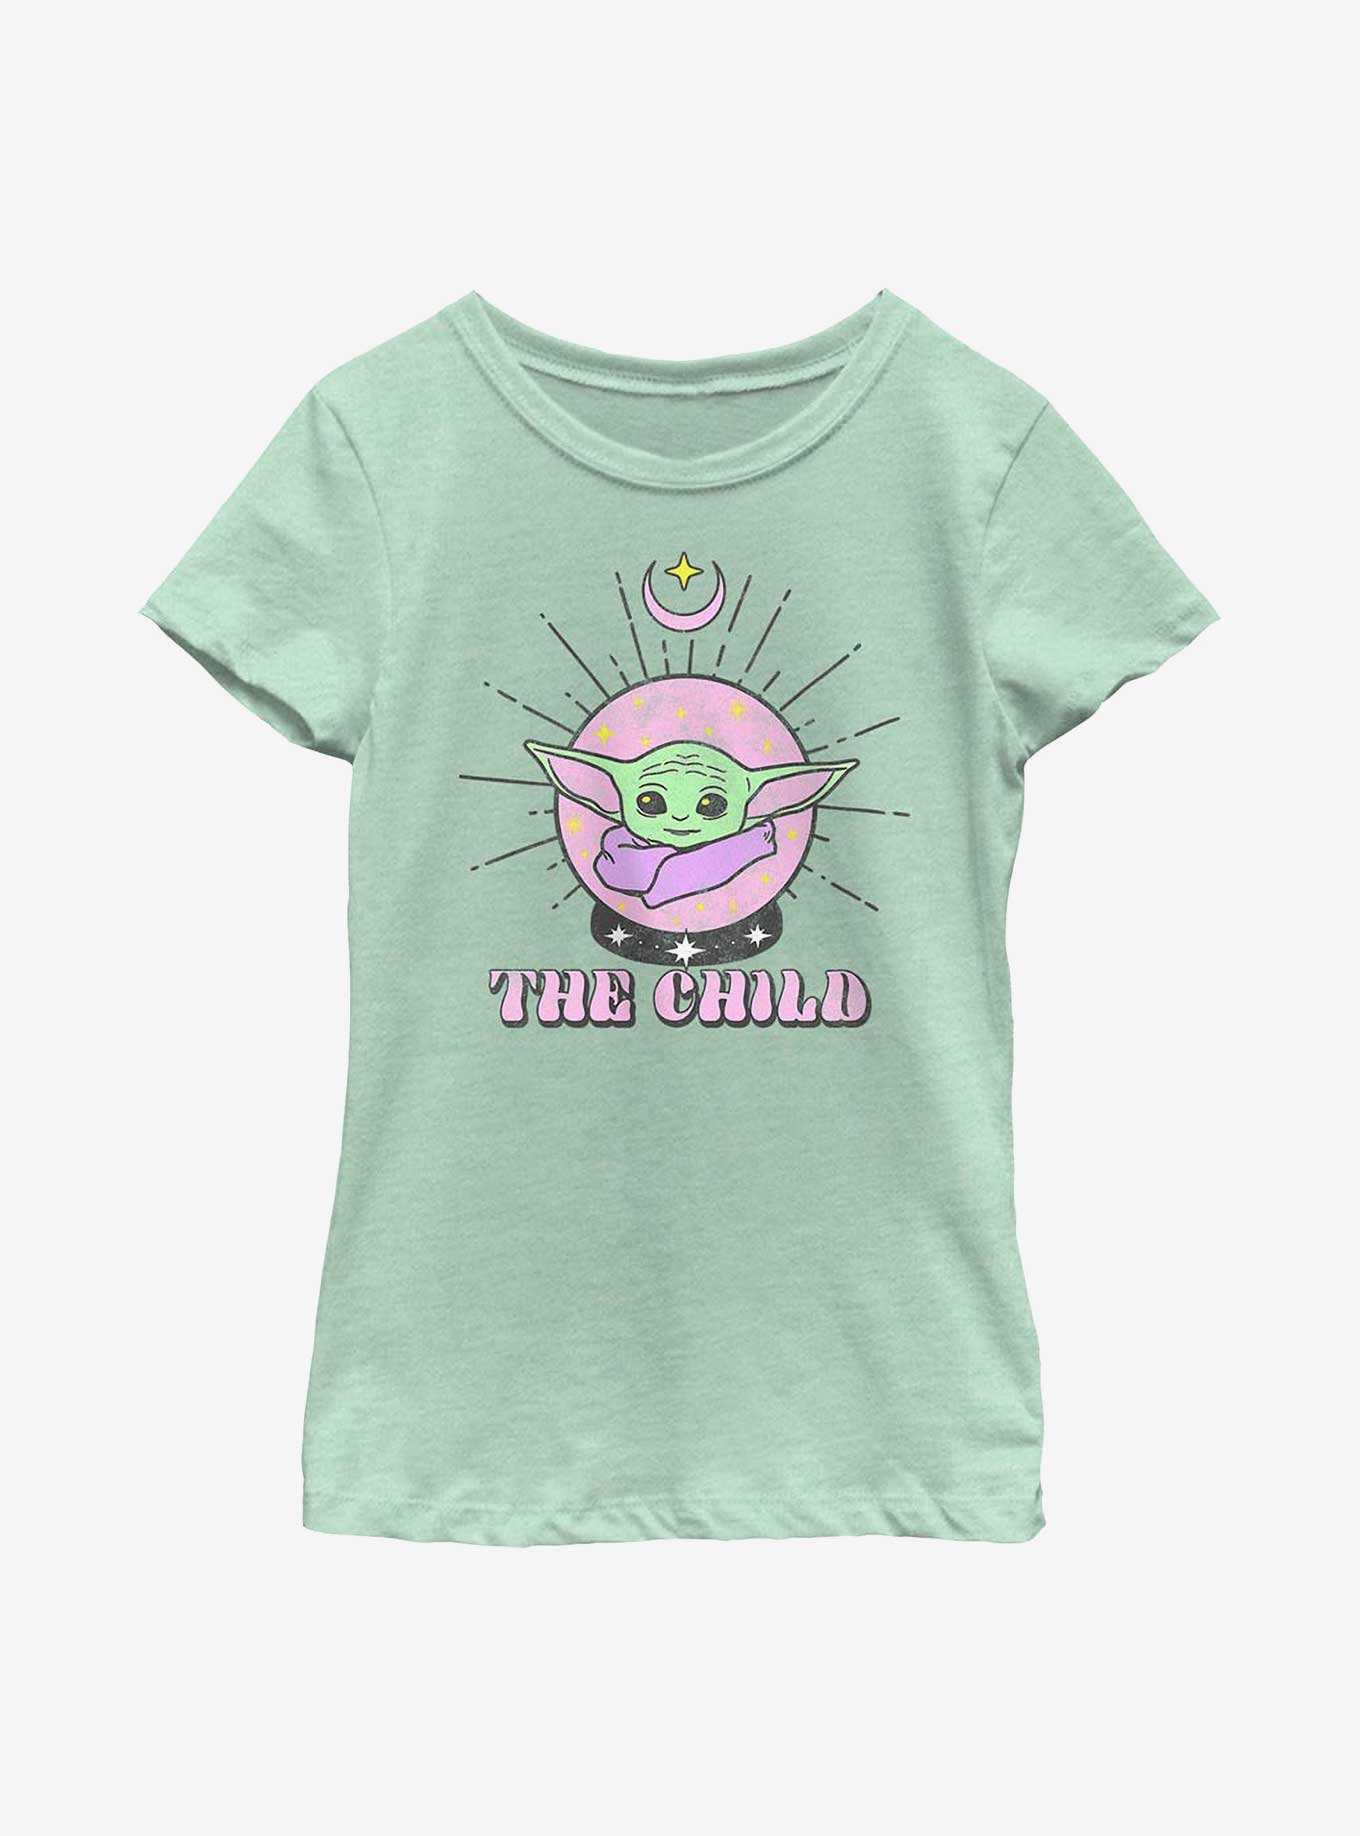 Star Wars The Mandalorian The Child Orb Youth Girls T-Shirt, , hi-res